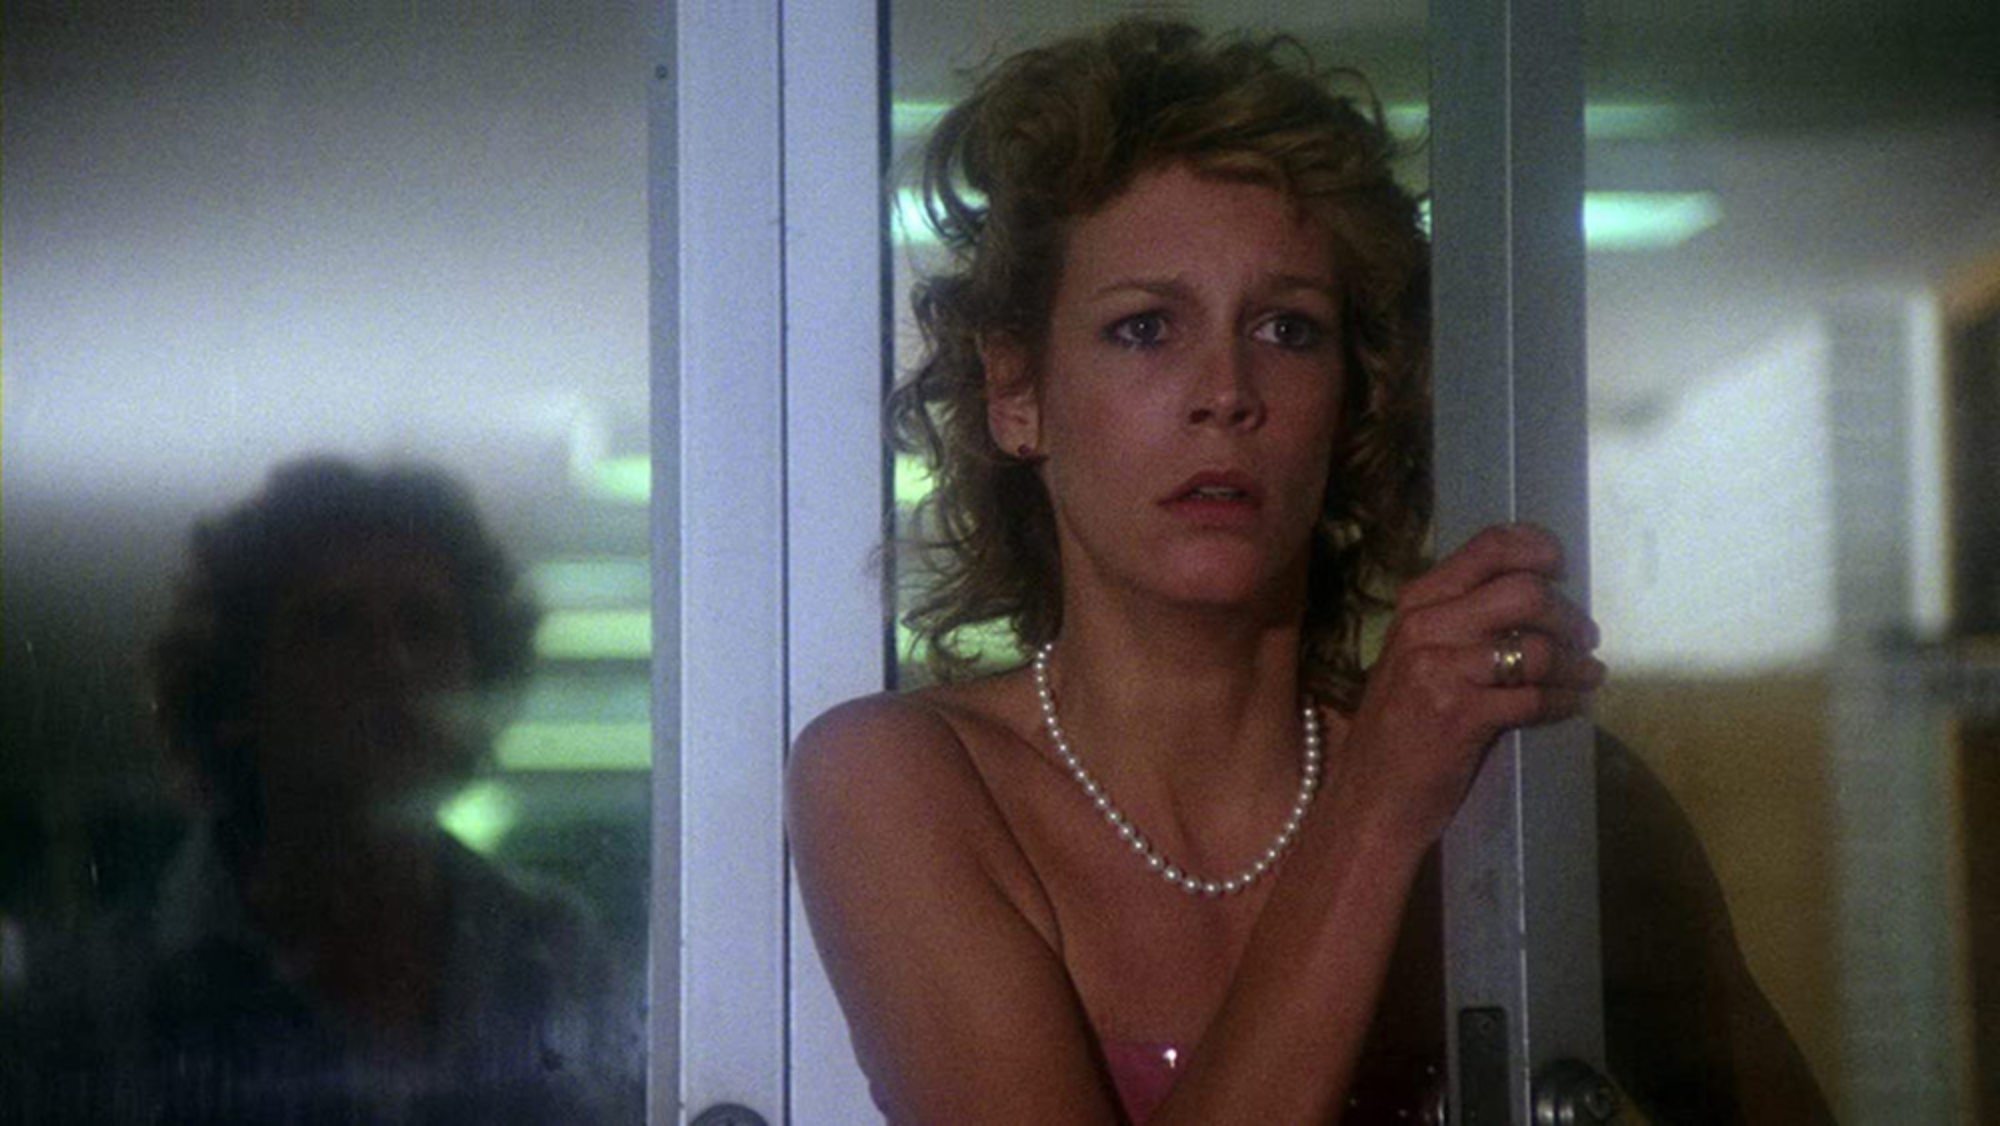 'Prom Night' Jamie Lee Curtis as Kimberly Hammond holding a door open looking scared.